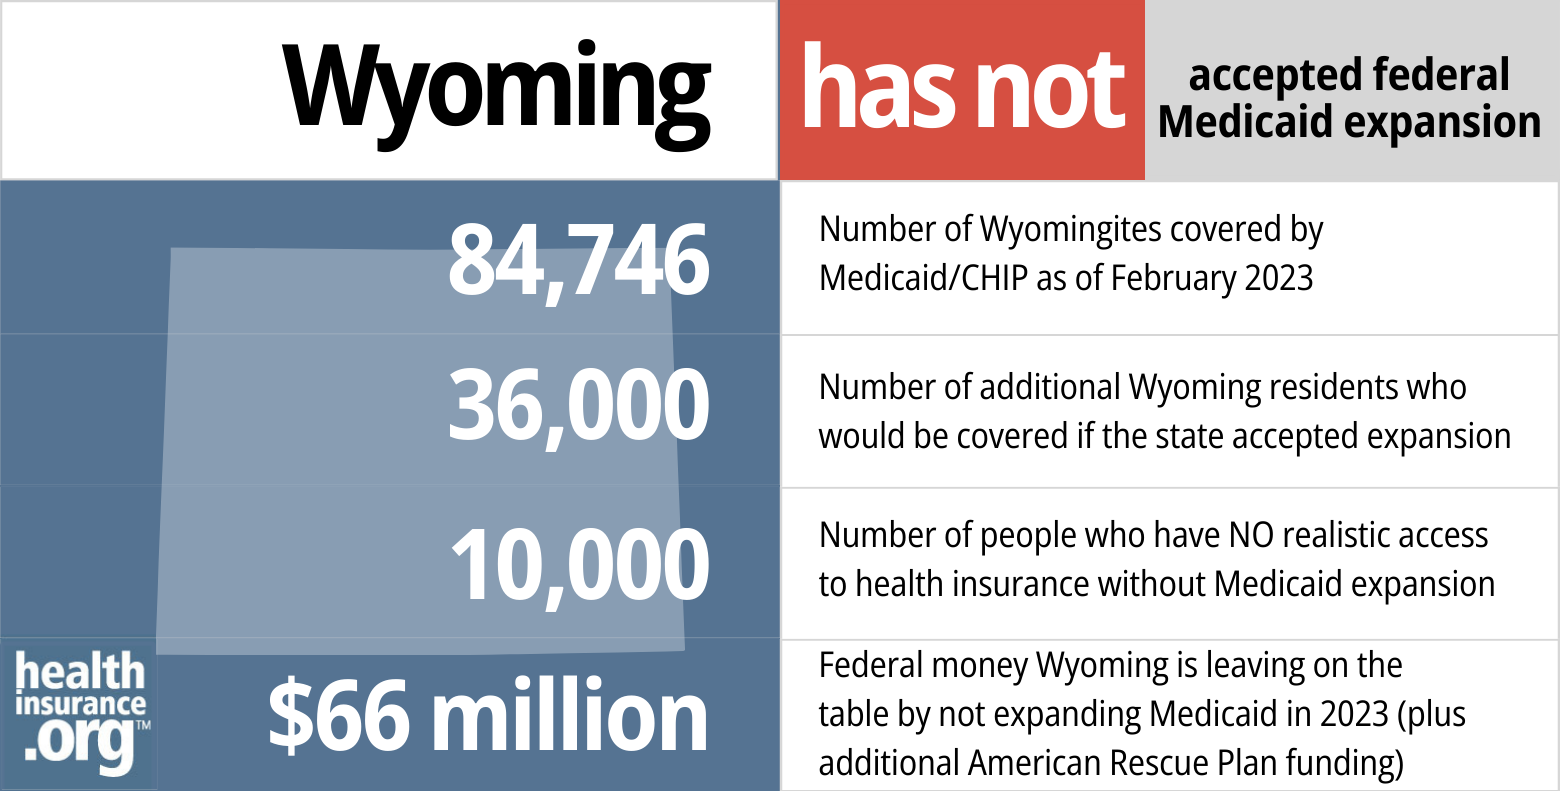 Medicaid eligibility and enrollment in Wyoming